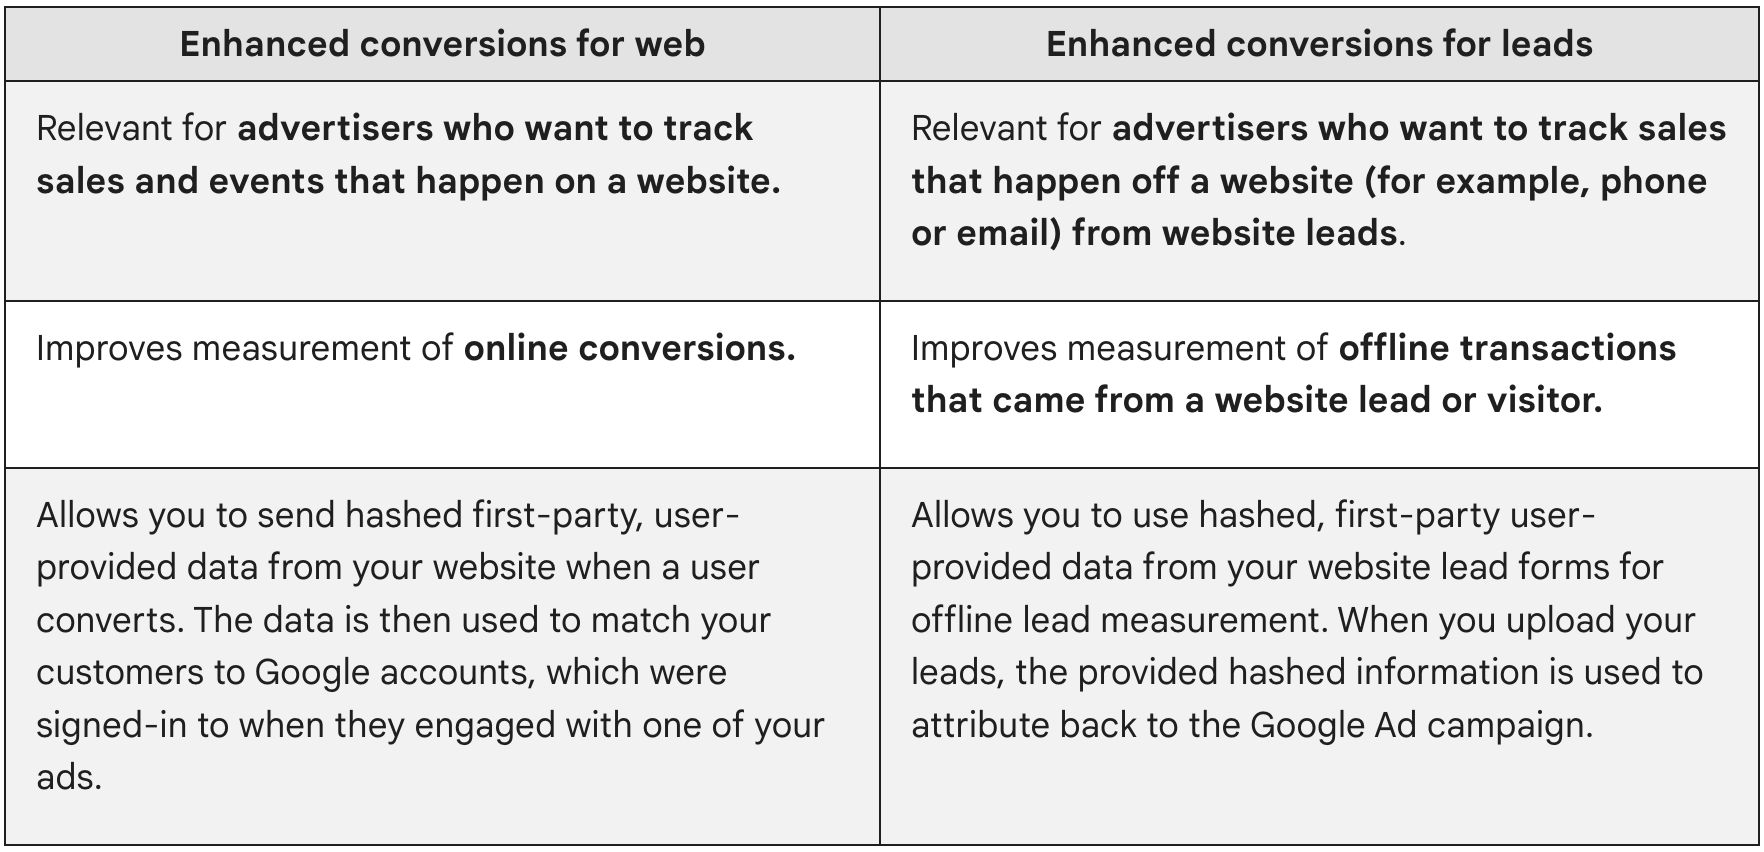 Enhanced conversions for web is relevant for advertisers who want to track
sales and events that happen on a website. Enhanced conversions for leads is
relevant for advertisers who want to track sales that happen off a website (for
example, phone or email) from website
leads.